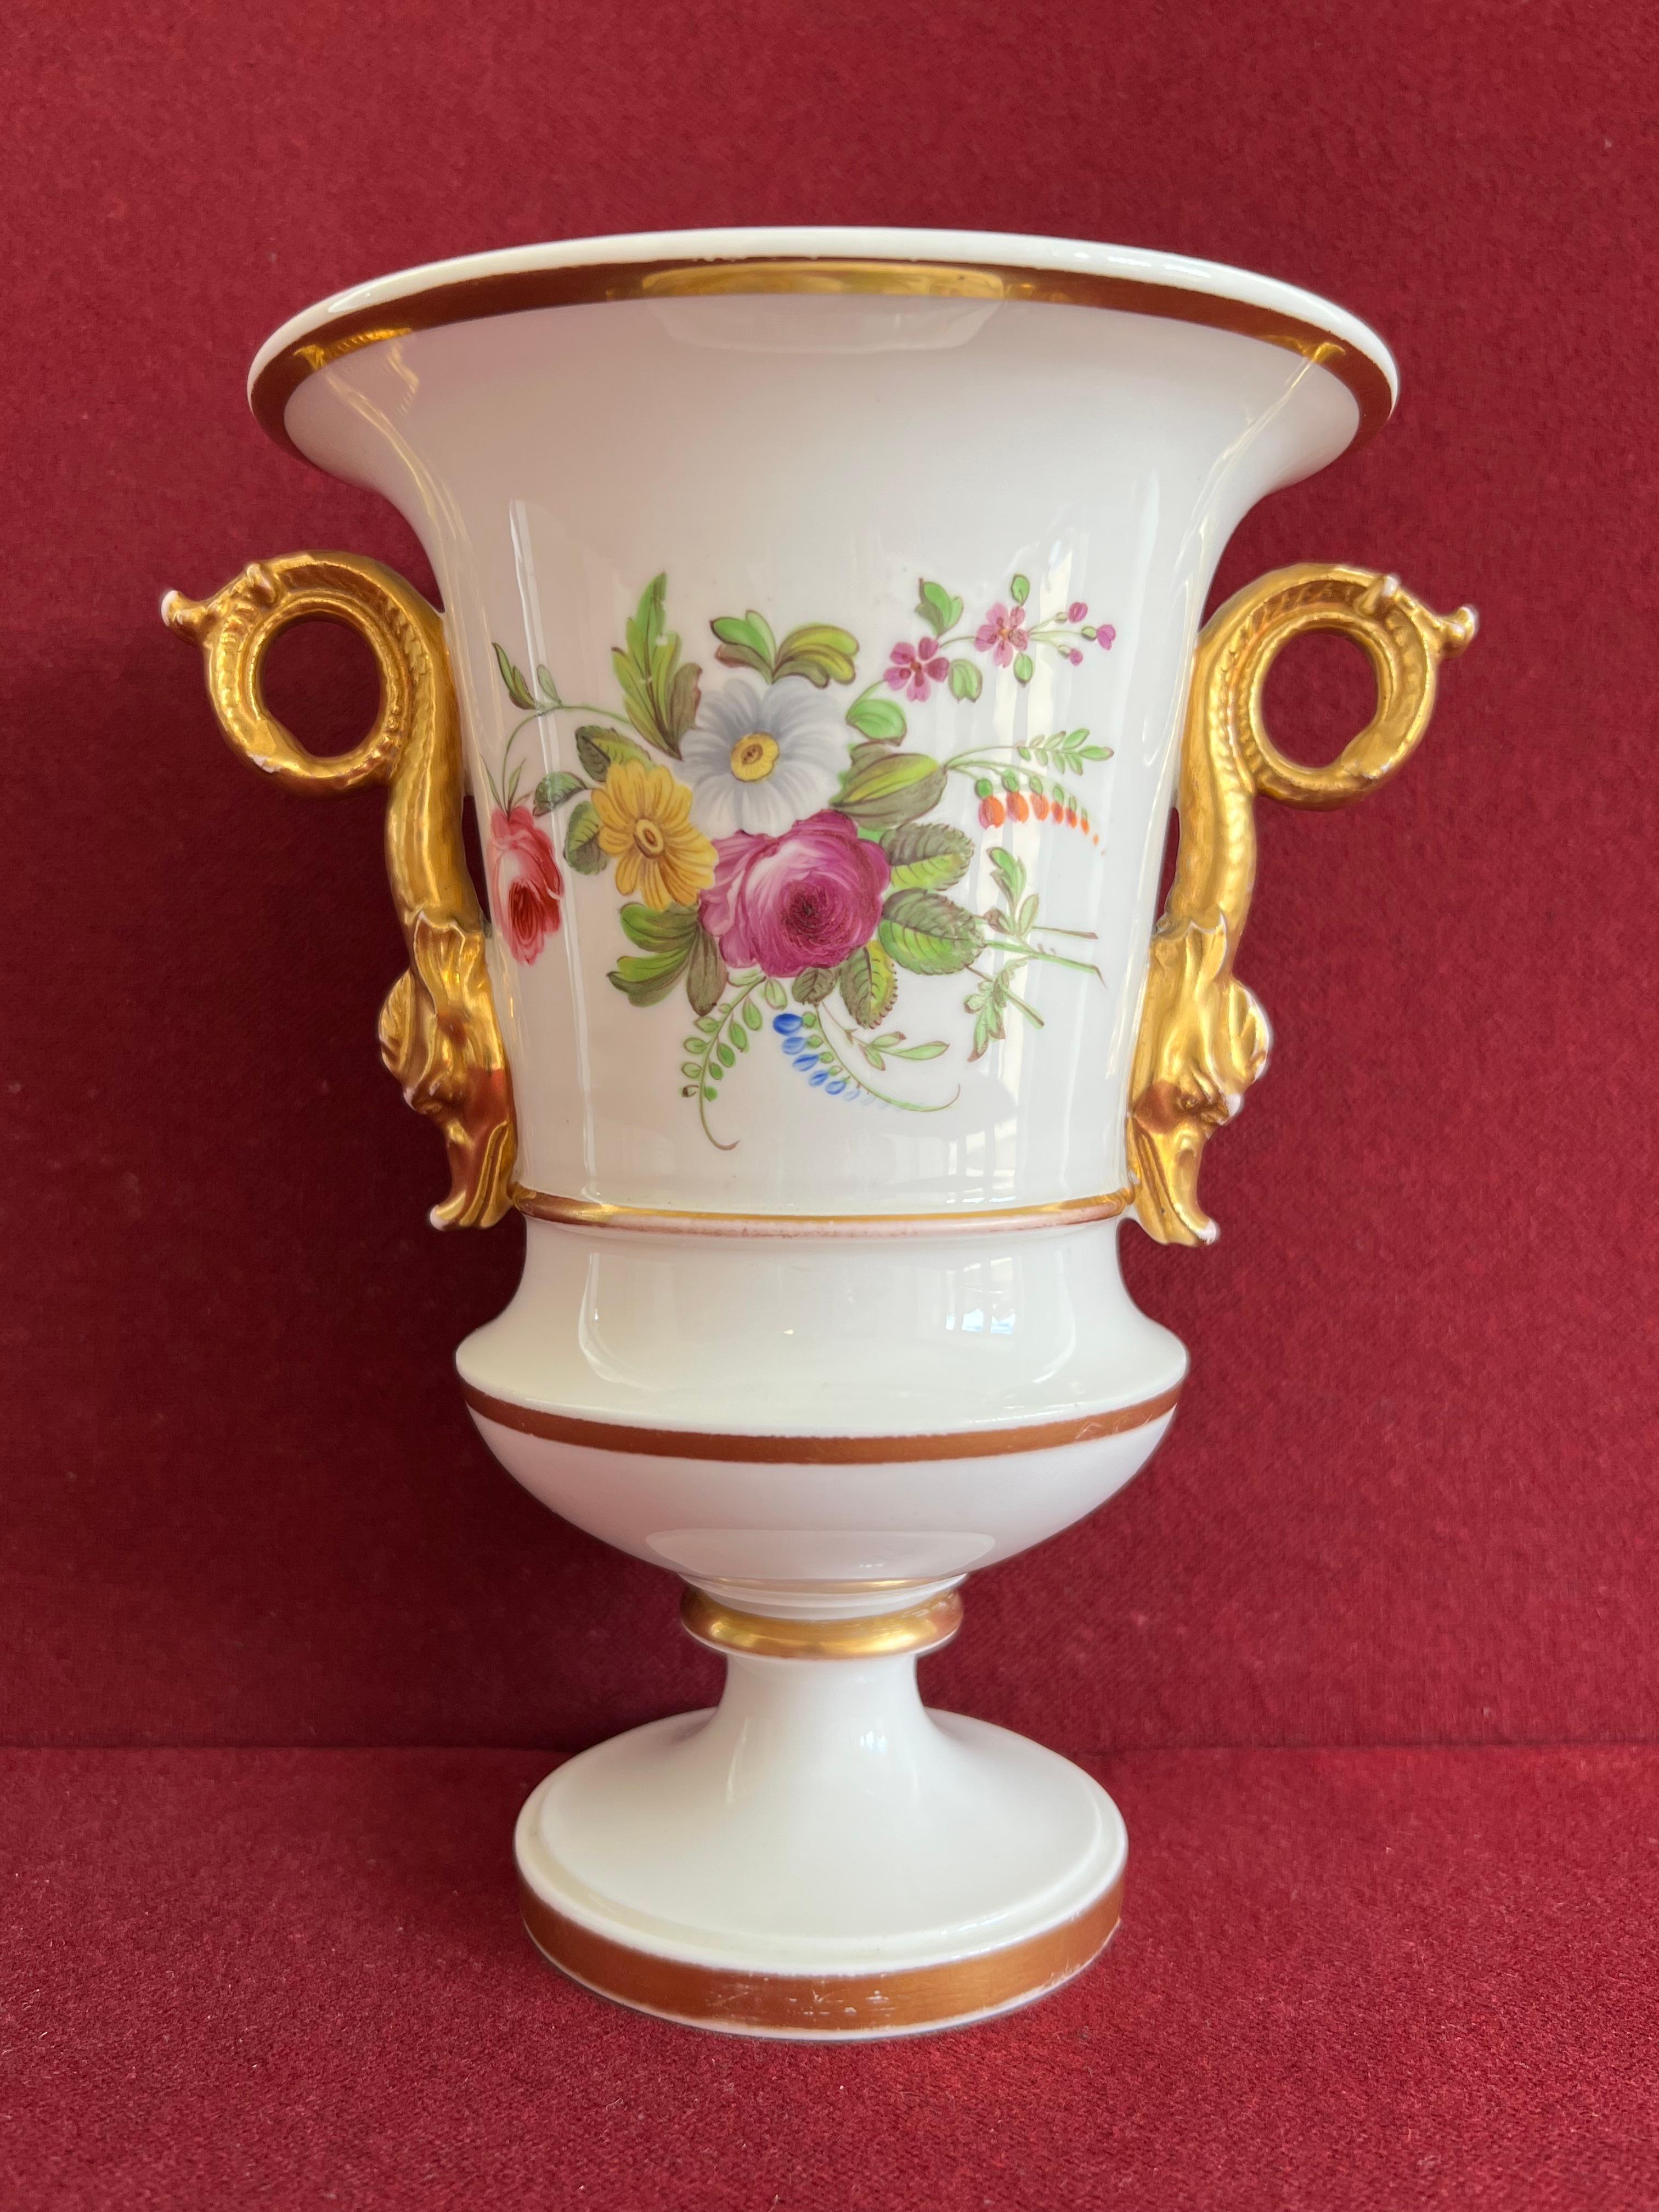 English Rare Spode Porcelain Shell Decorated Vase Pattern 3930 C.1824 For Sale